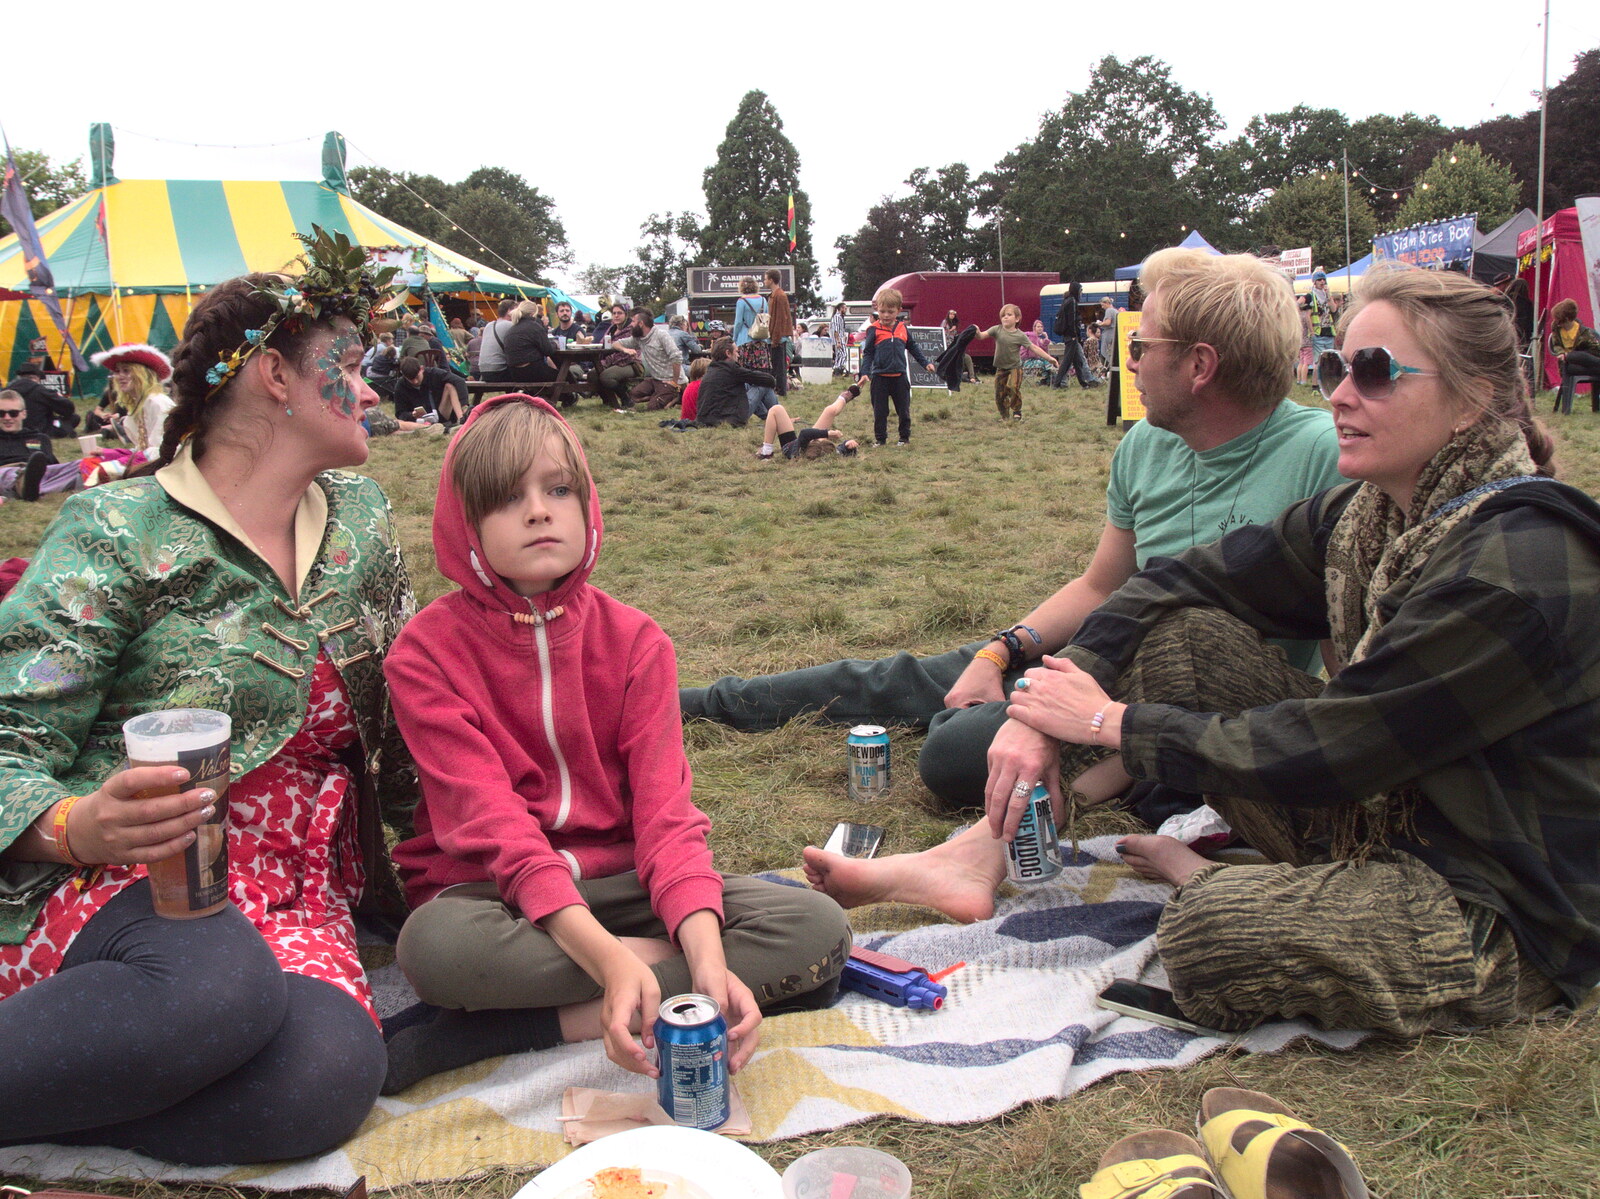 It's sort-of lunchtime from Maui Waui Festival, Hill Farm, Gressenhall, Norfolk - 28th August 2021